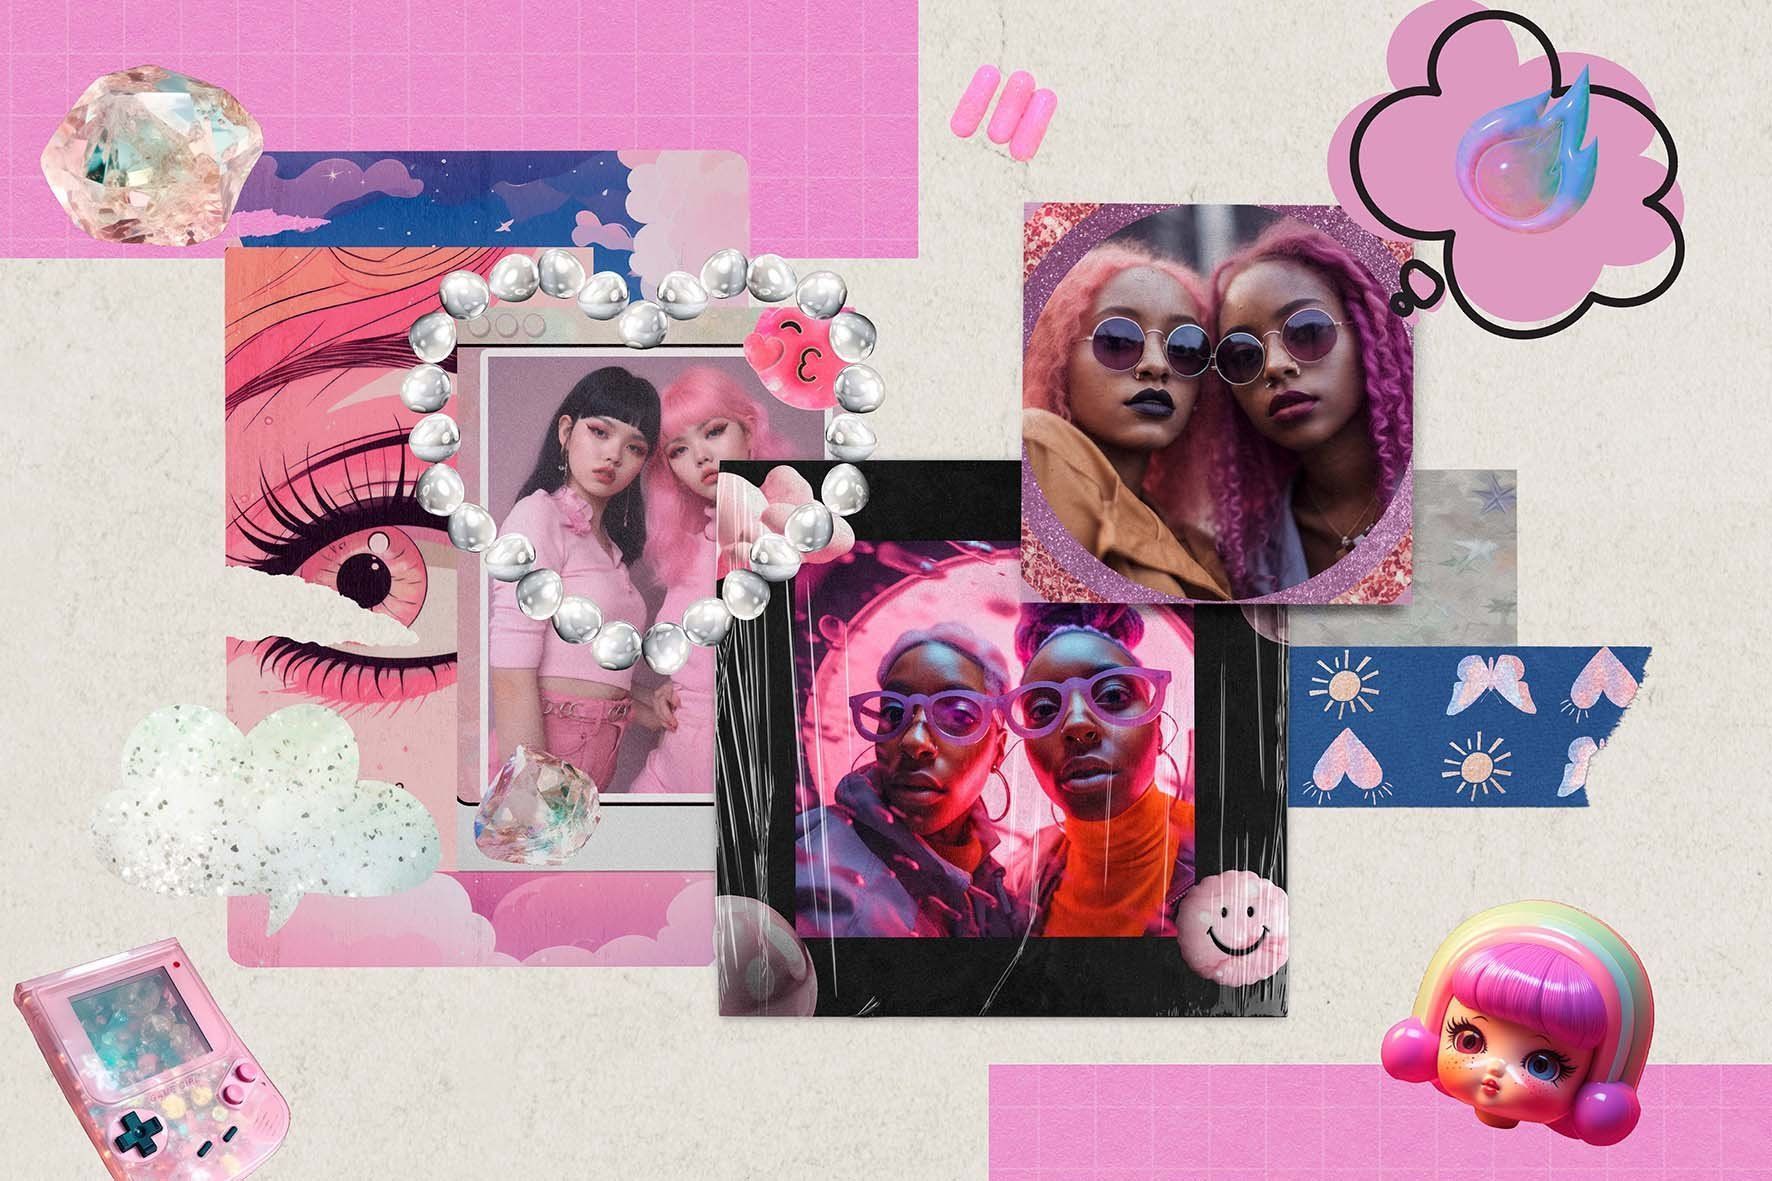 A collage of images including two women with pink hair, a gameboy, a thought bubble with the words 